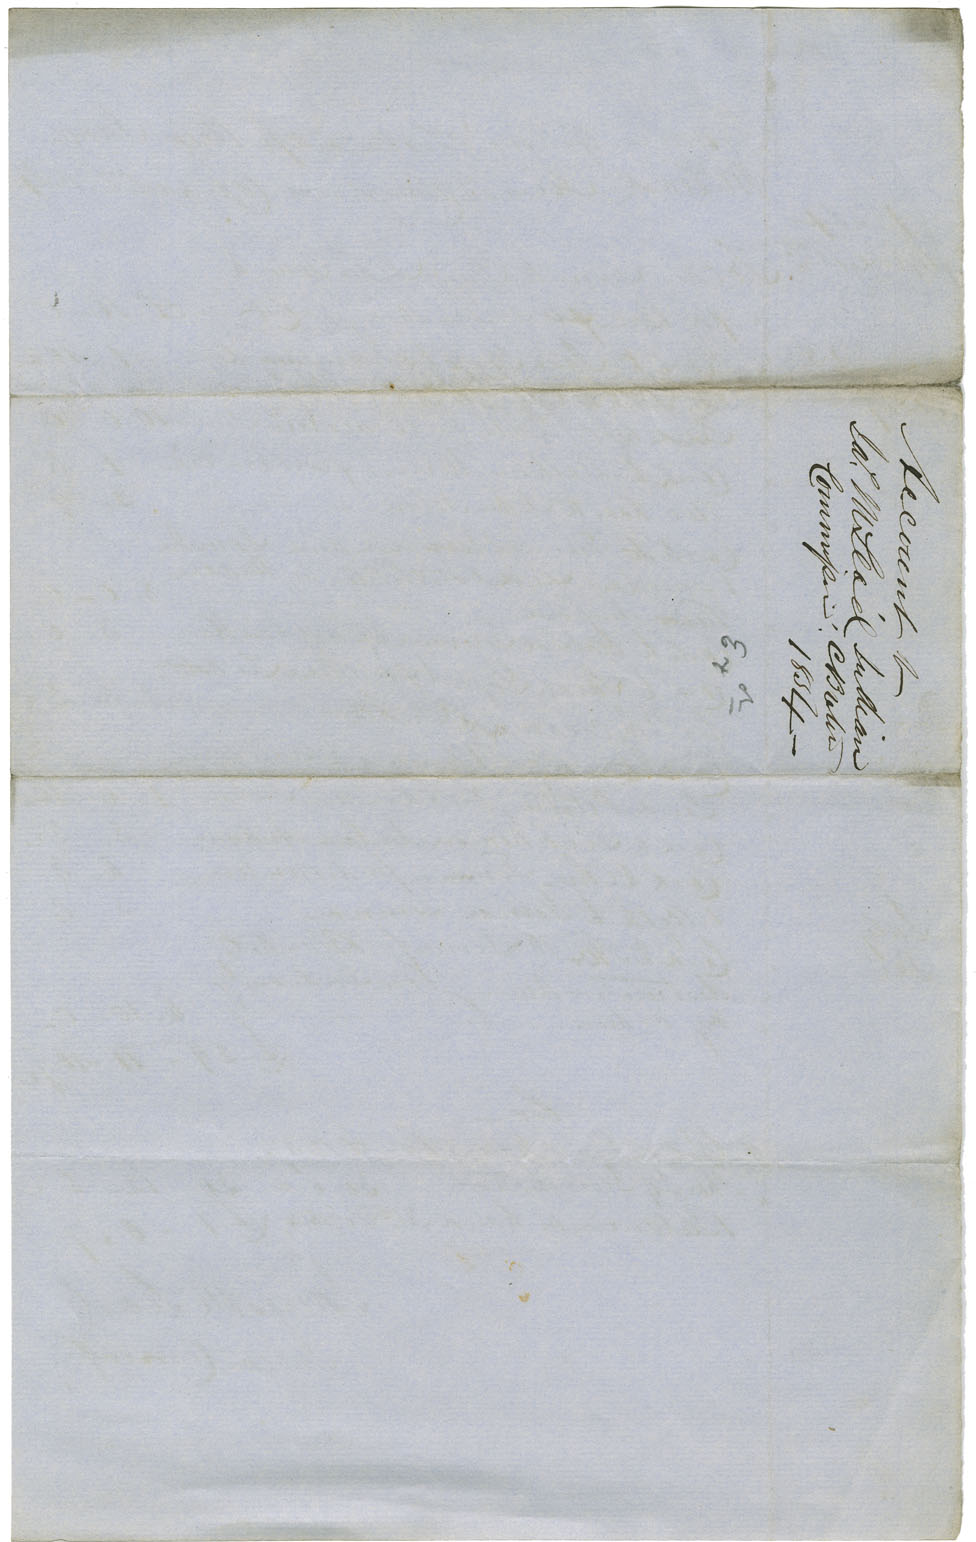 Account of the monies received and expended among the Mi'kmaq of Cape Breton by James McLeod, Commissioner. Names mentioned.